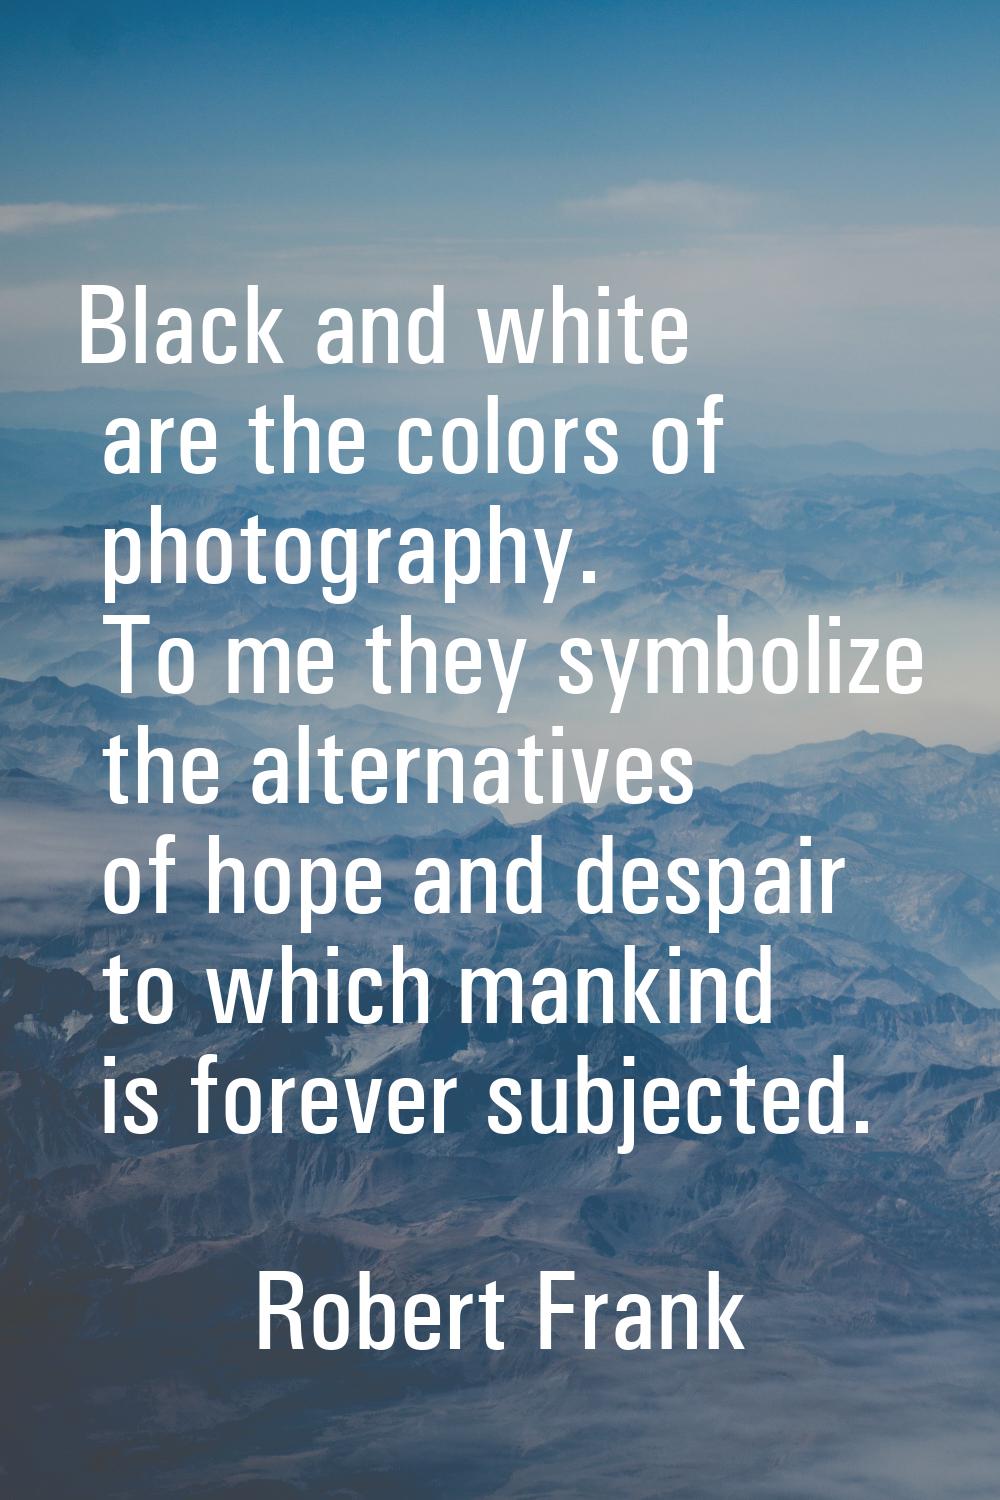 Black and white are the colors of photography. To me they symbolize the alternatives of hope and de